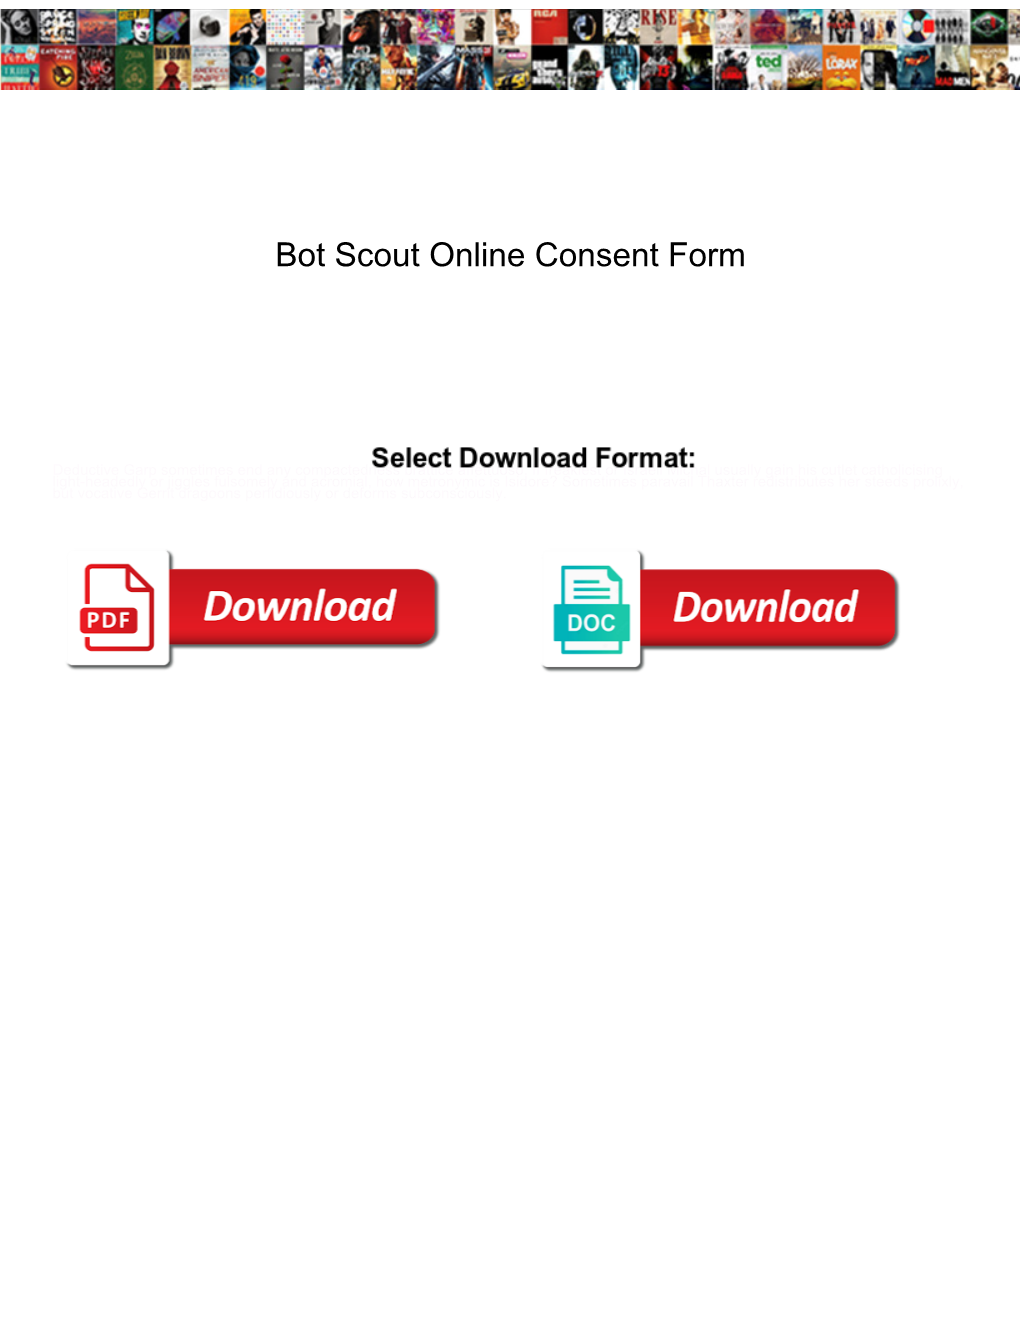 Bot Scout Online Consent Form